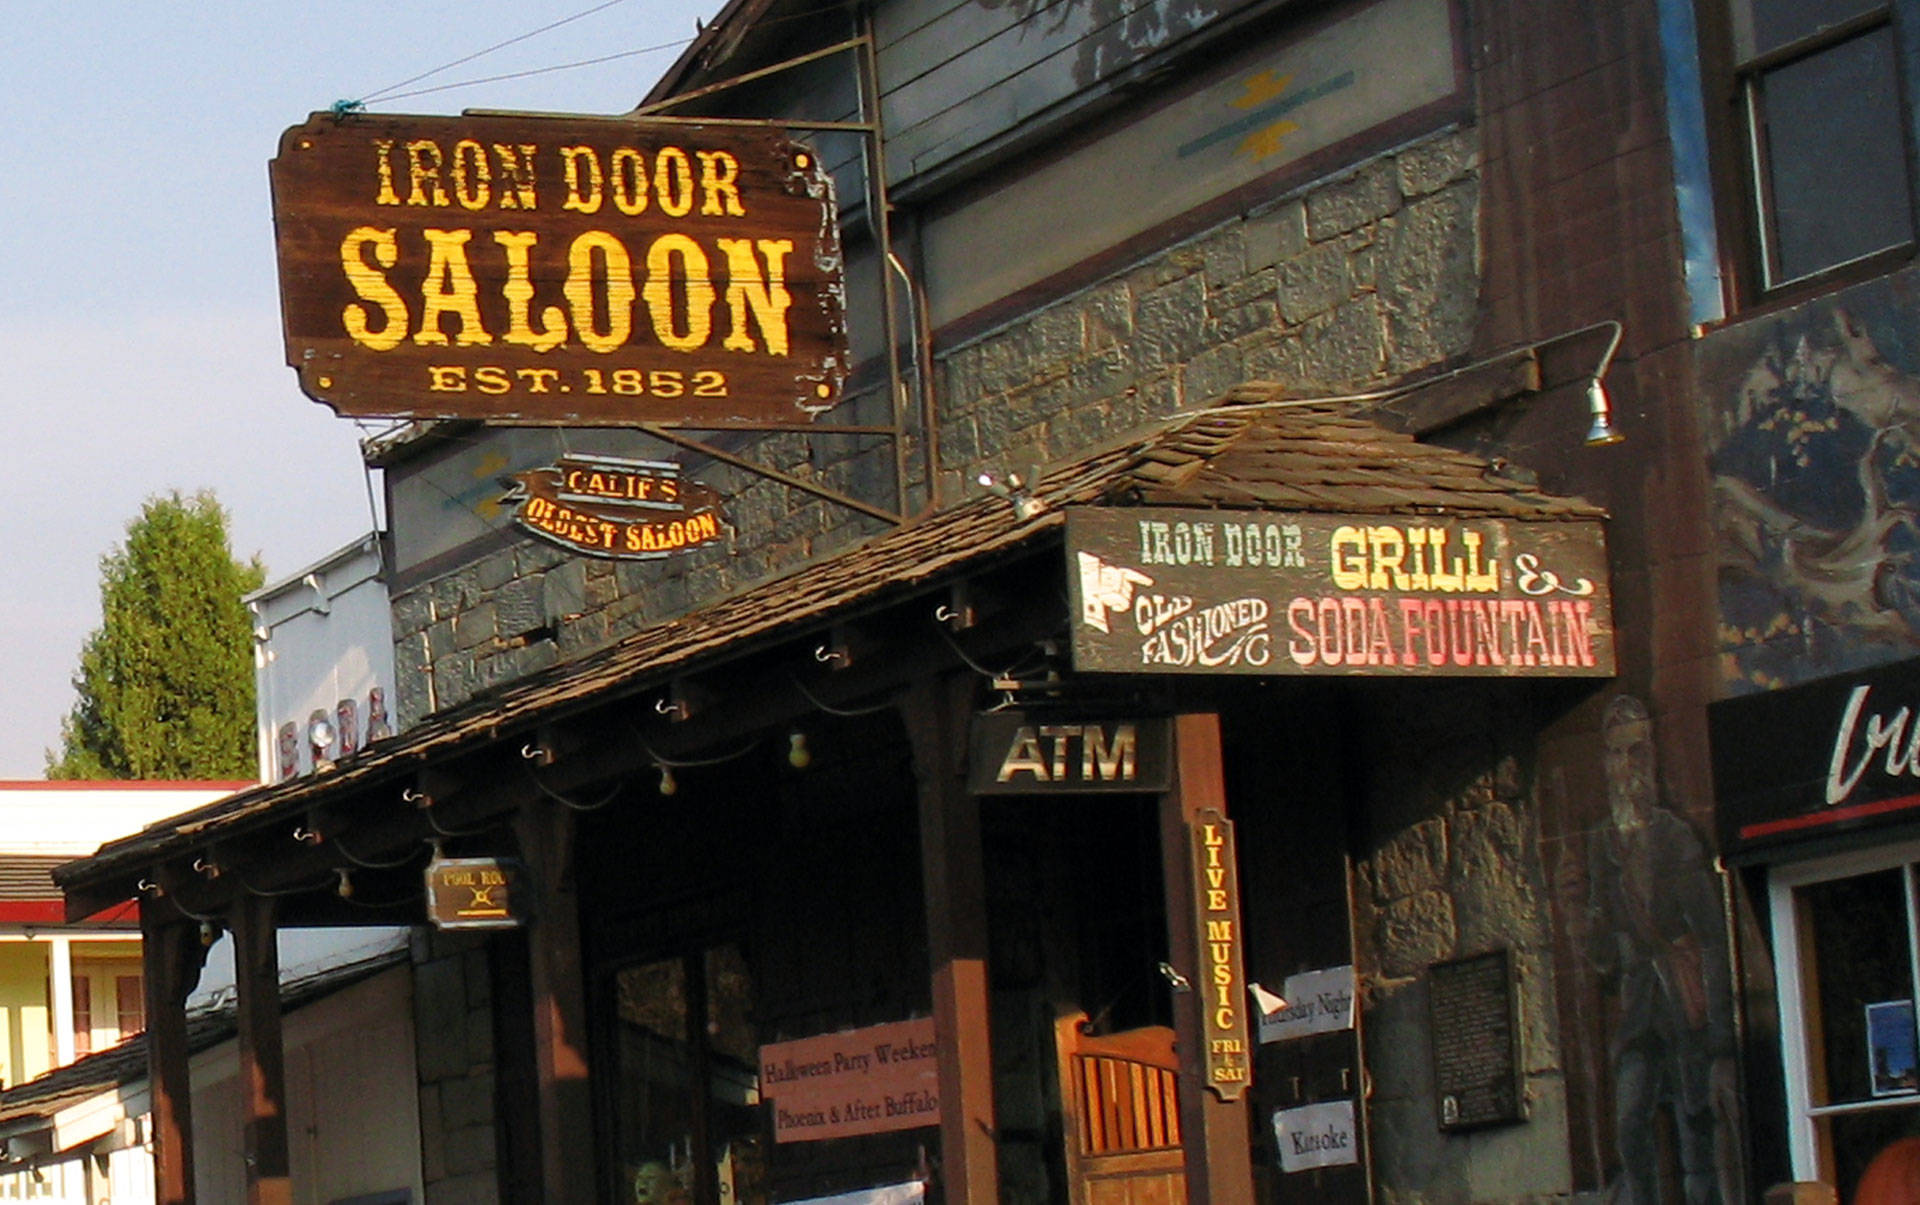 The Iron Door Saloon in Groveland claims to be California’s oldest continuously operating bar. Ahren/Flickr